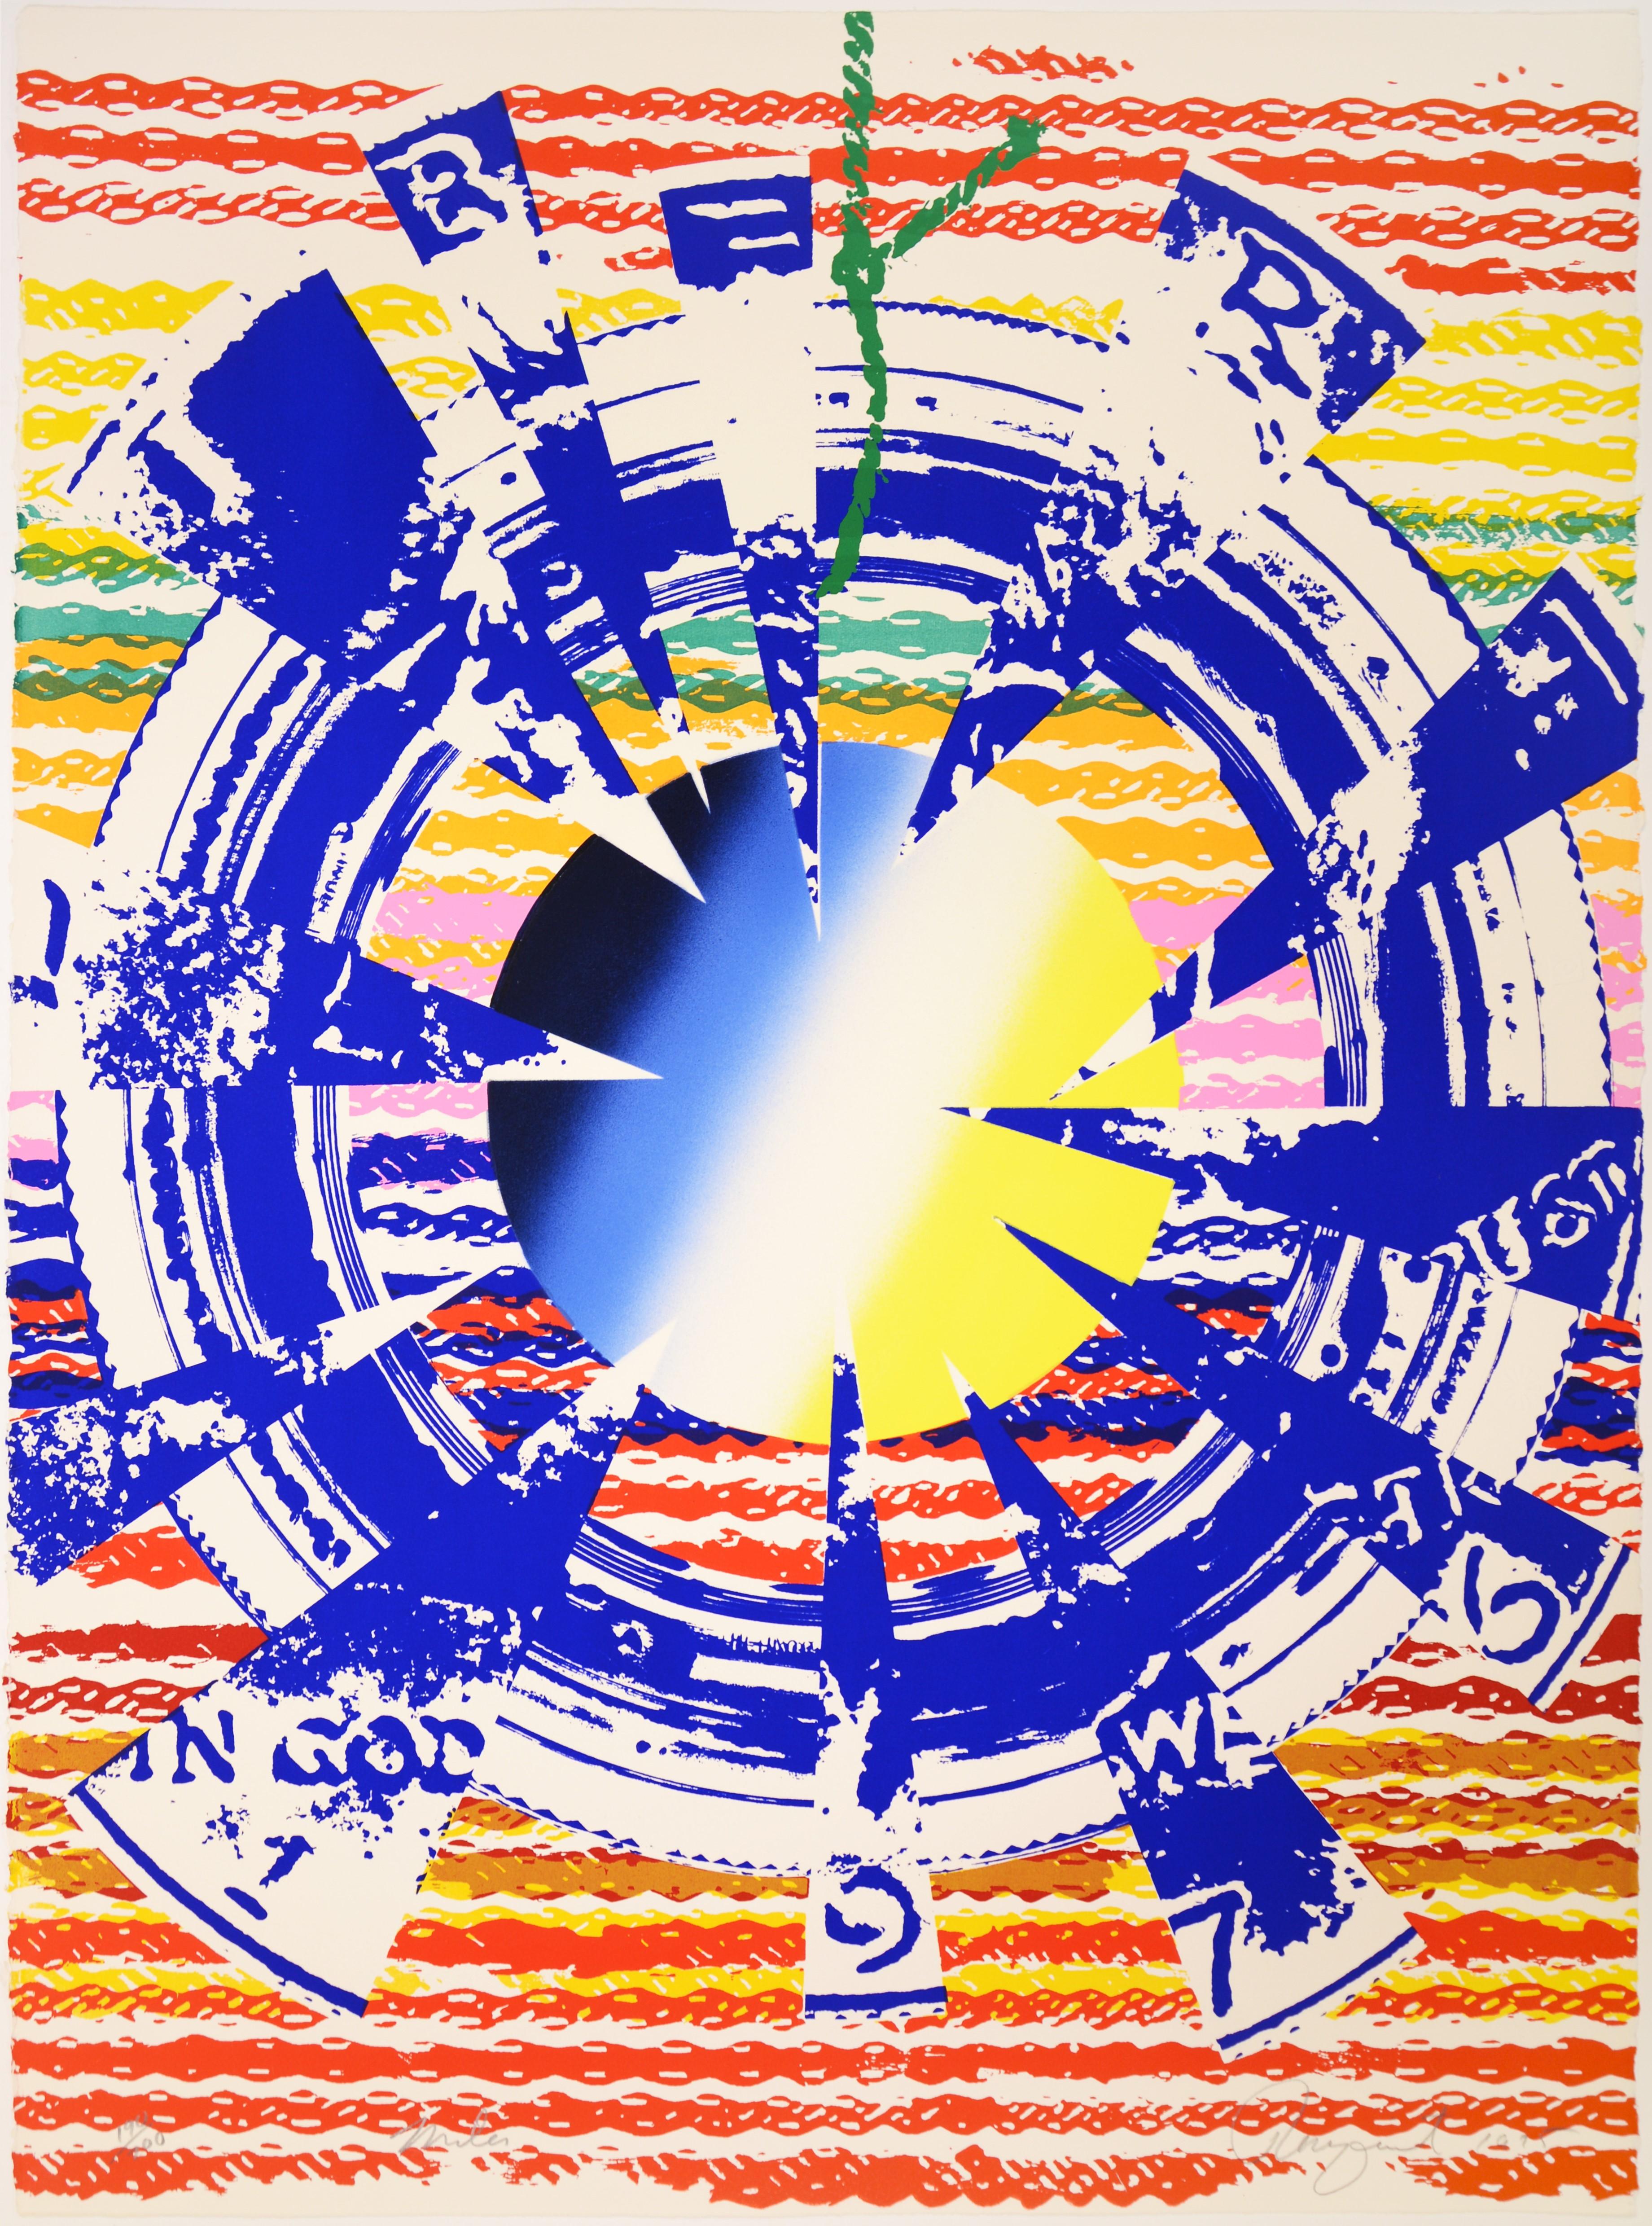 Miles from America - Print by James Rosenquist